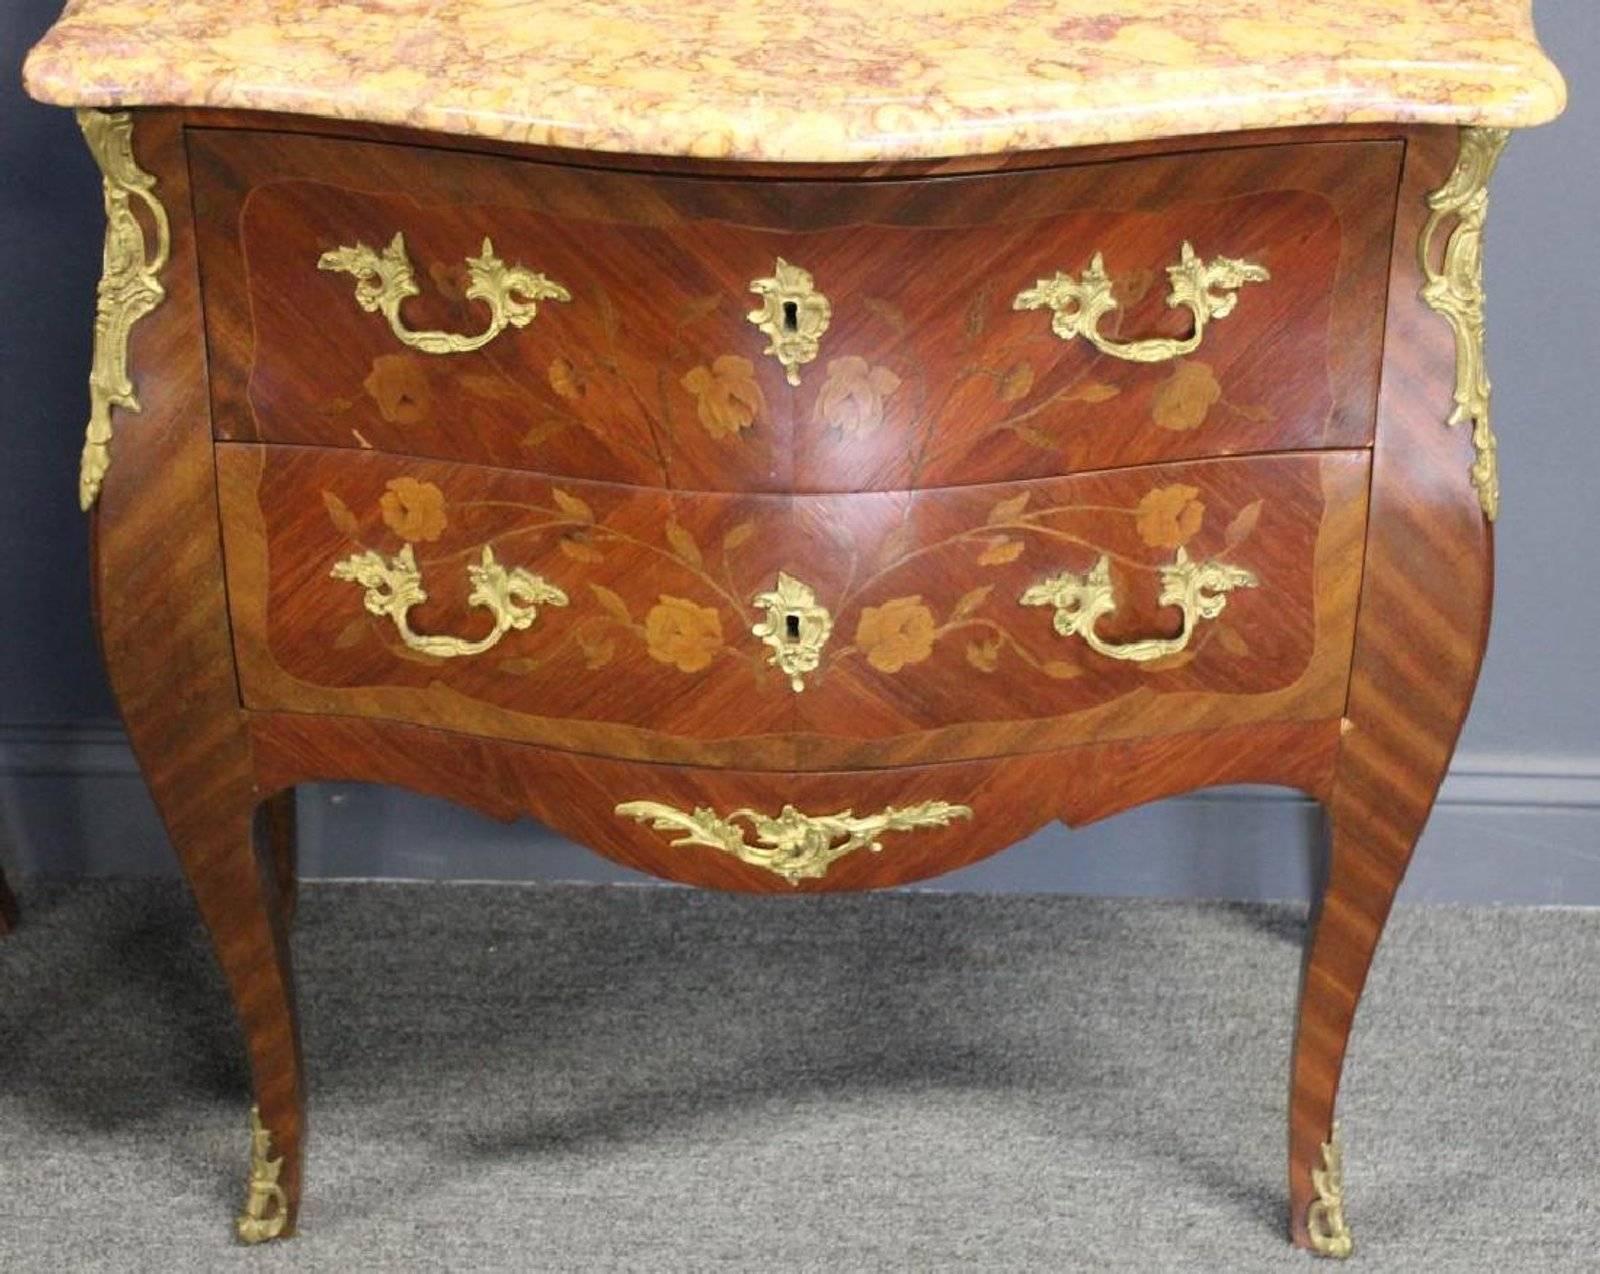 A lovely pair of Louis XV style bronze-mounted marble-top commodes.
Floral marquetry throughout. Two drawers, and great size.